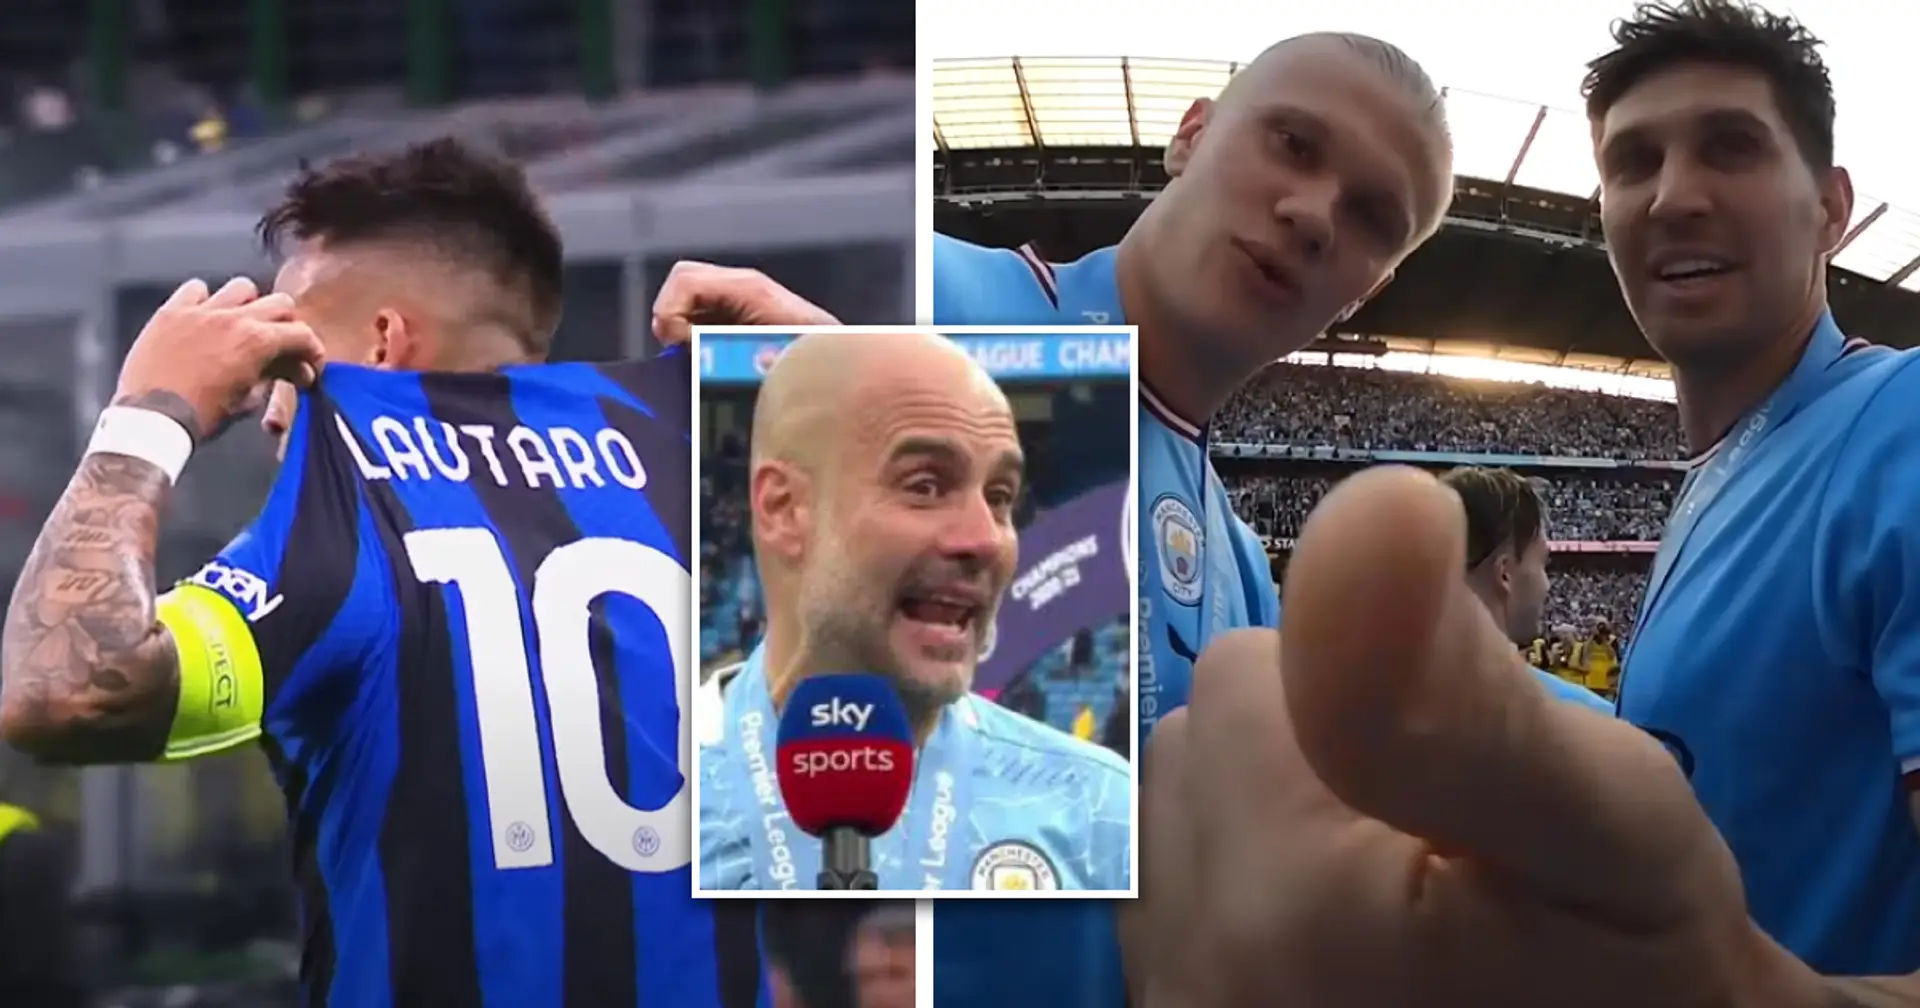 One player across Man City and Inter Milan squads won Champions League — he tried to get rid of his medal